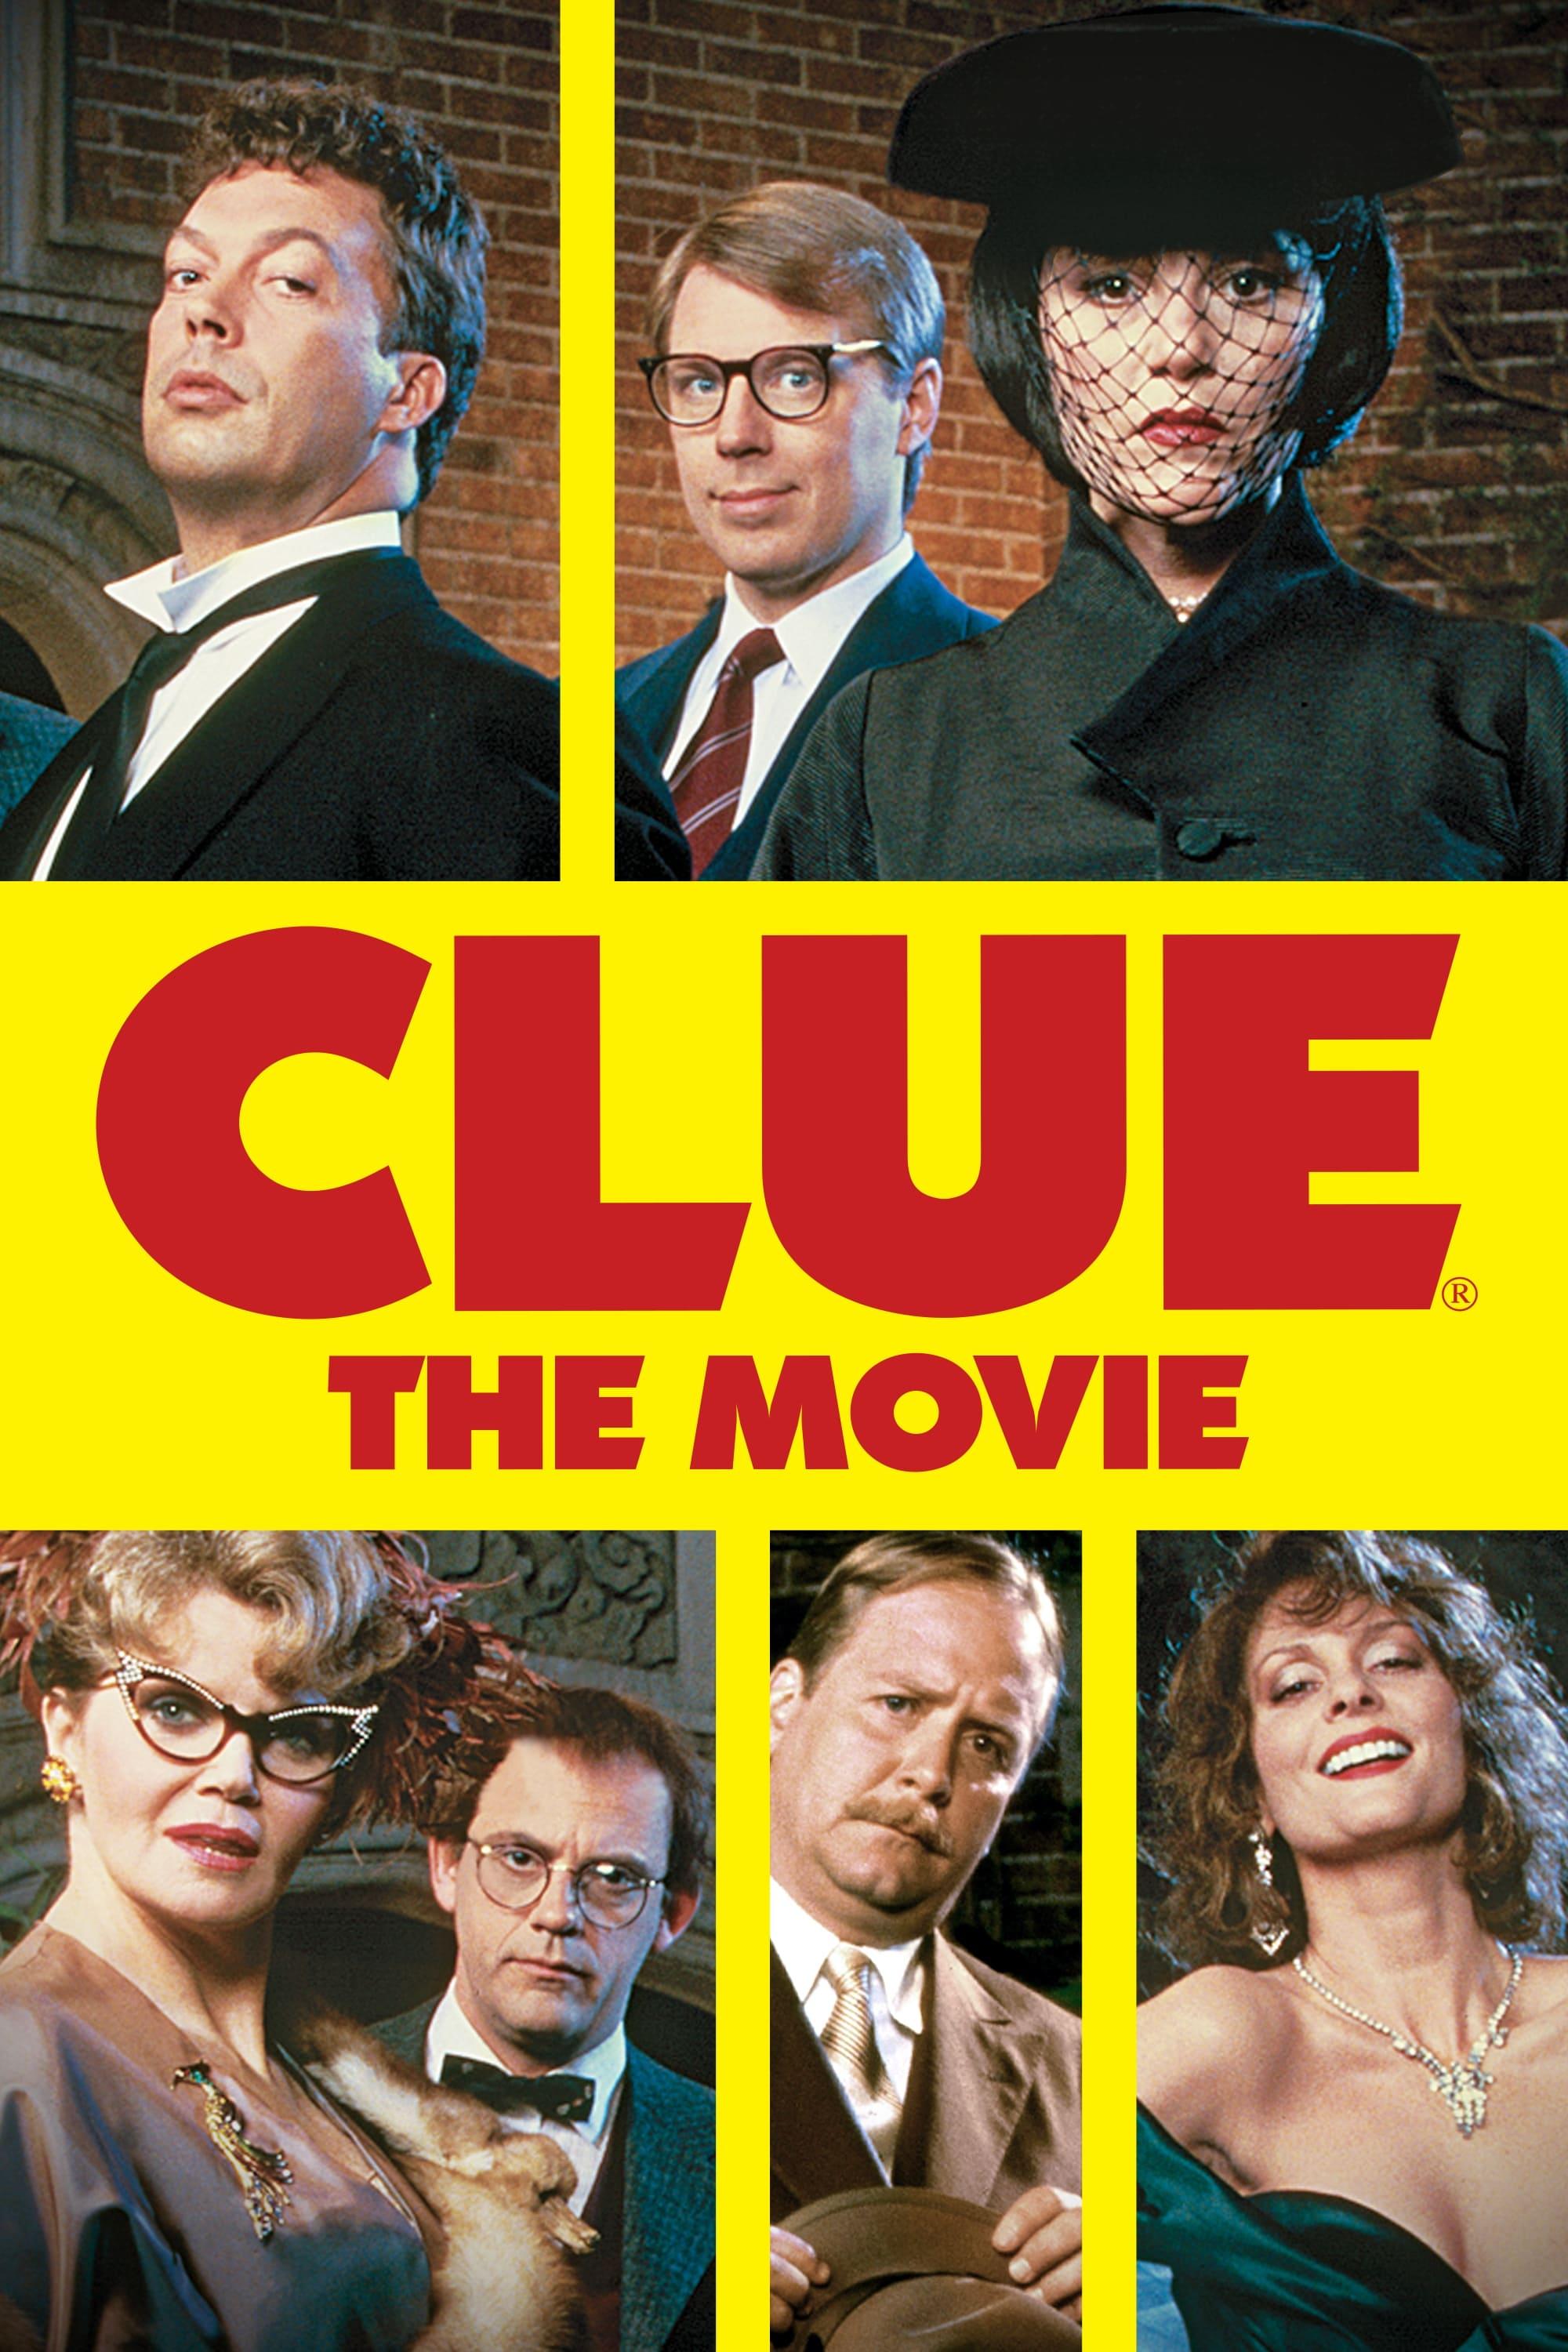 Clue poster